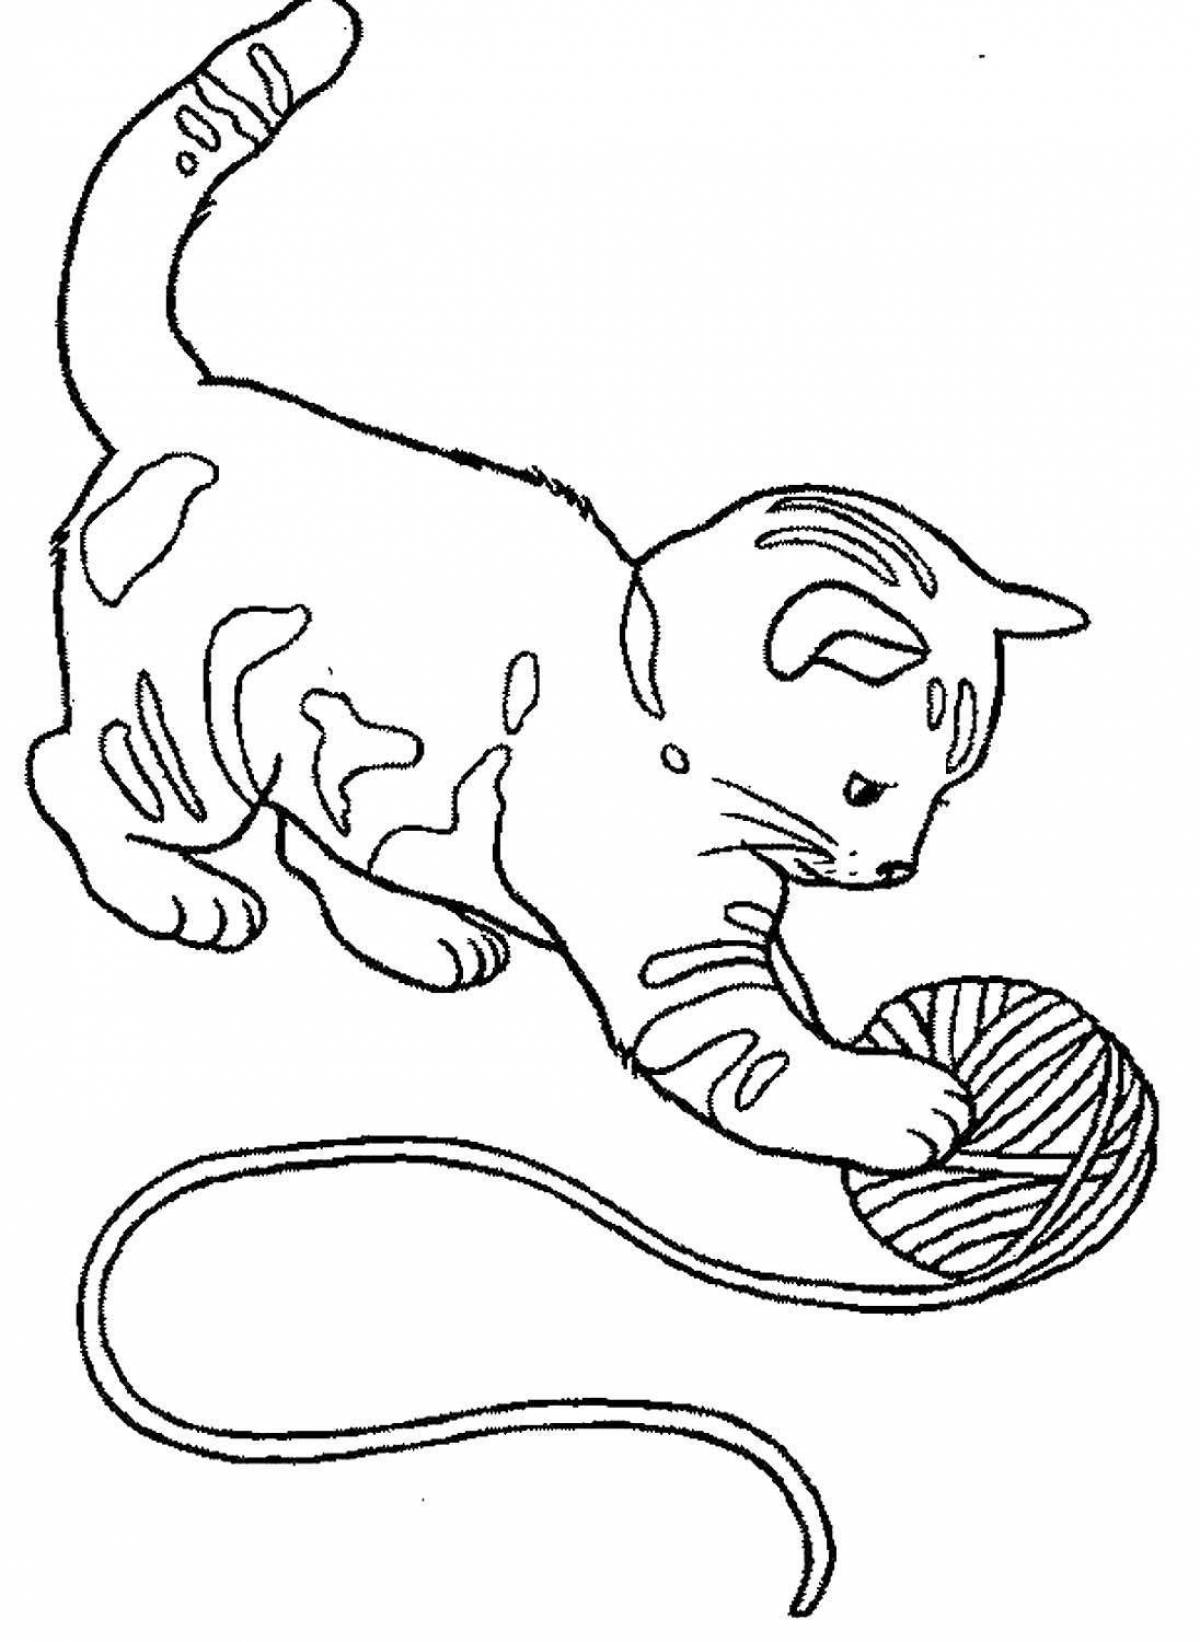 Live cat drinking milk coloring book